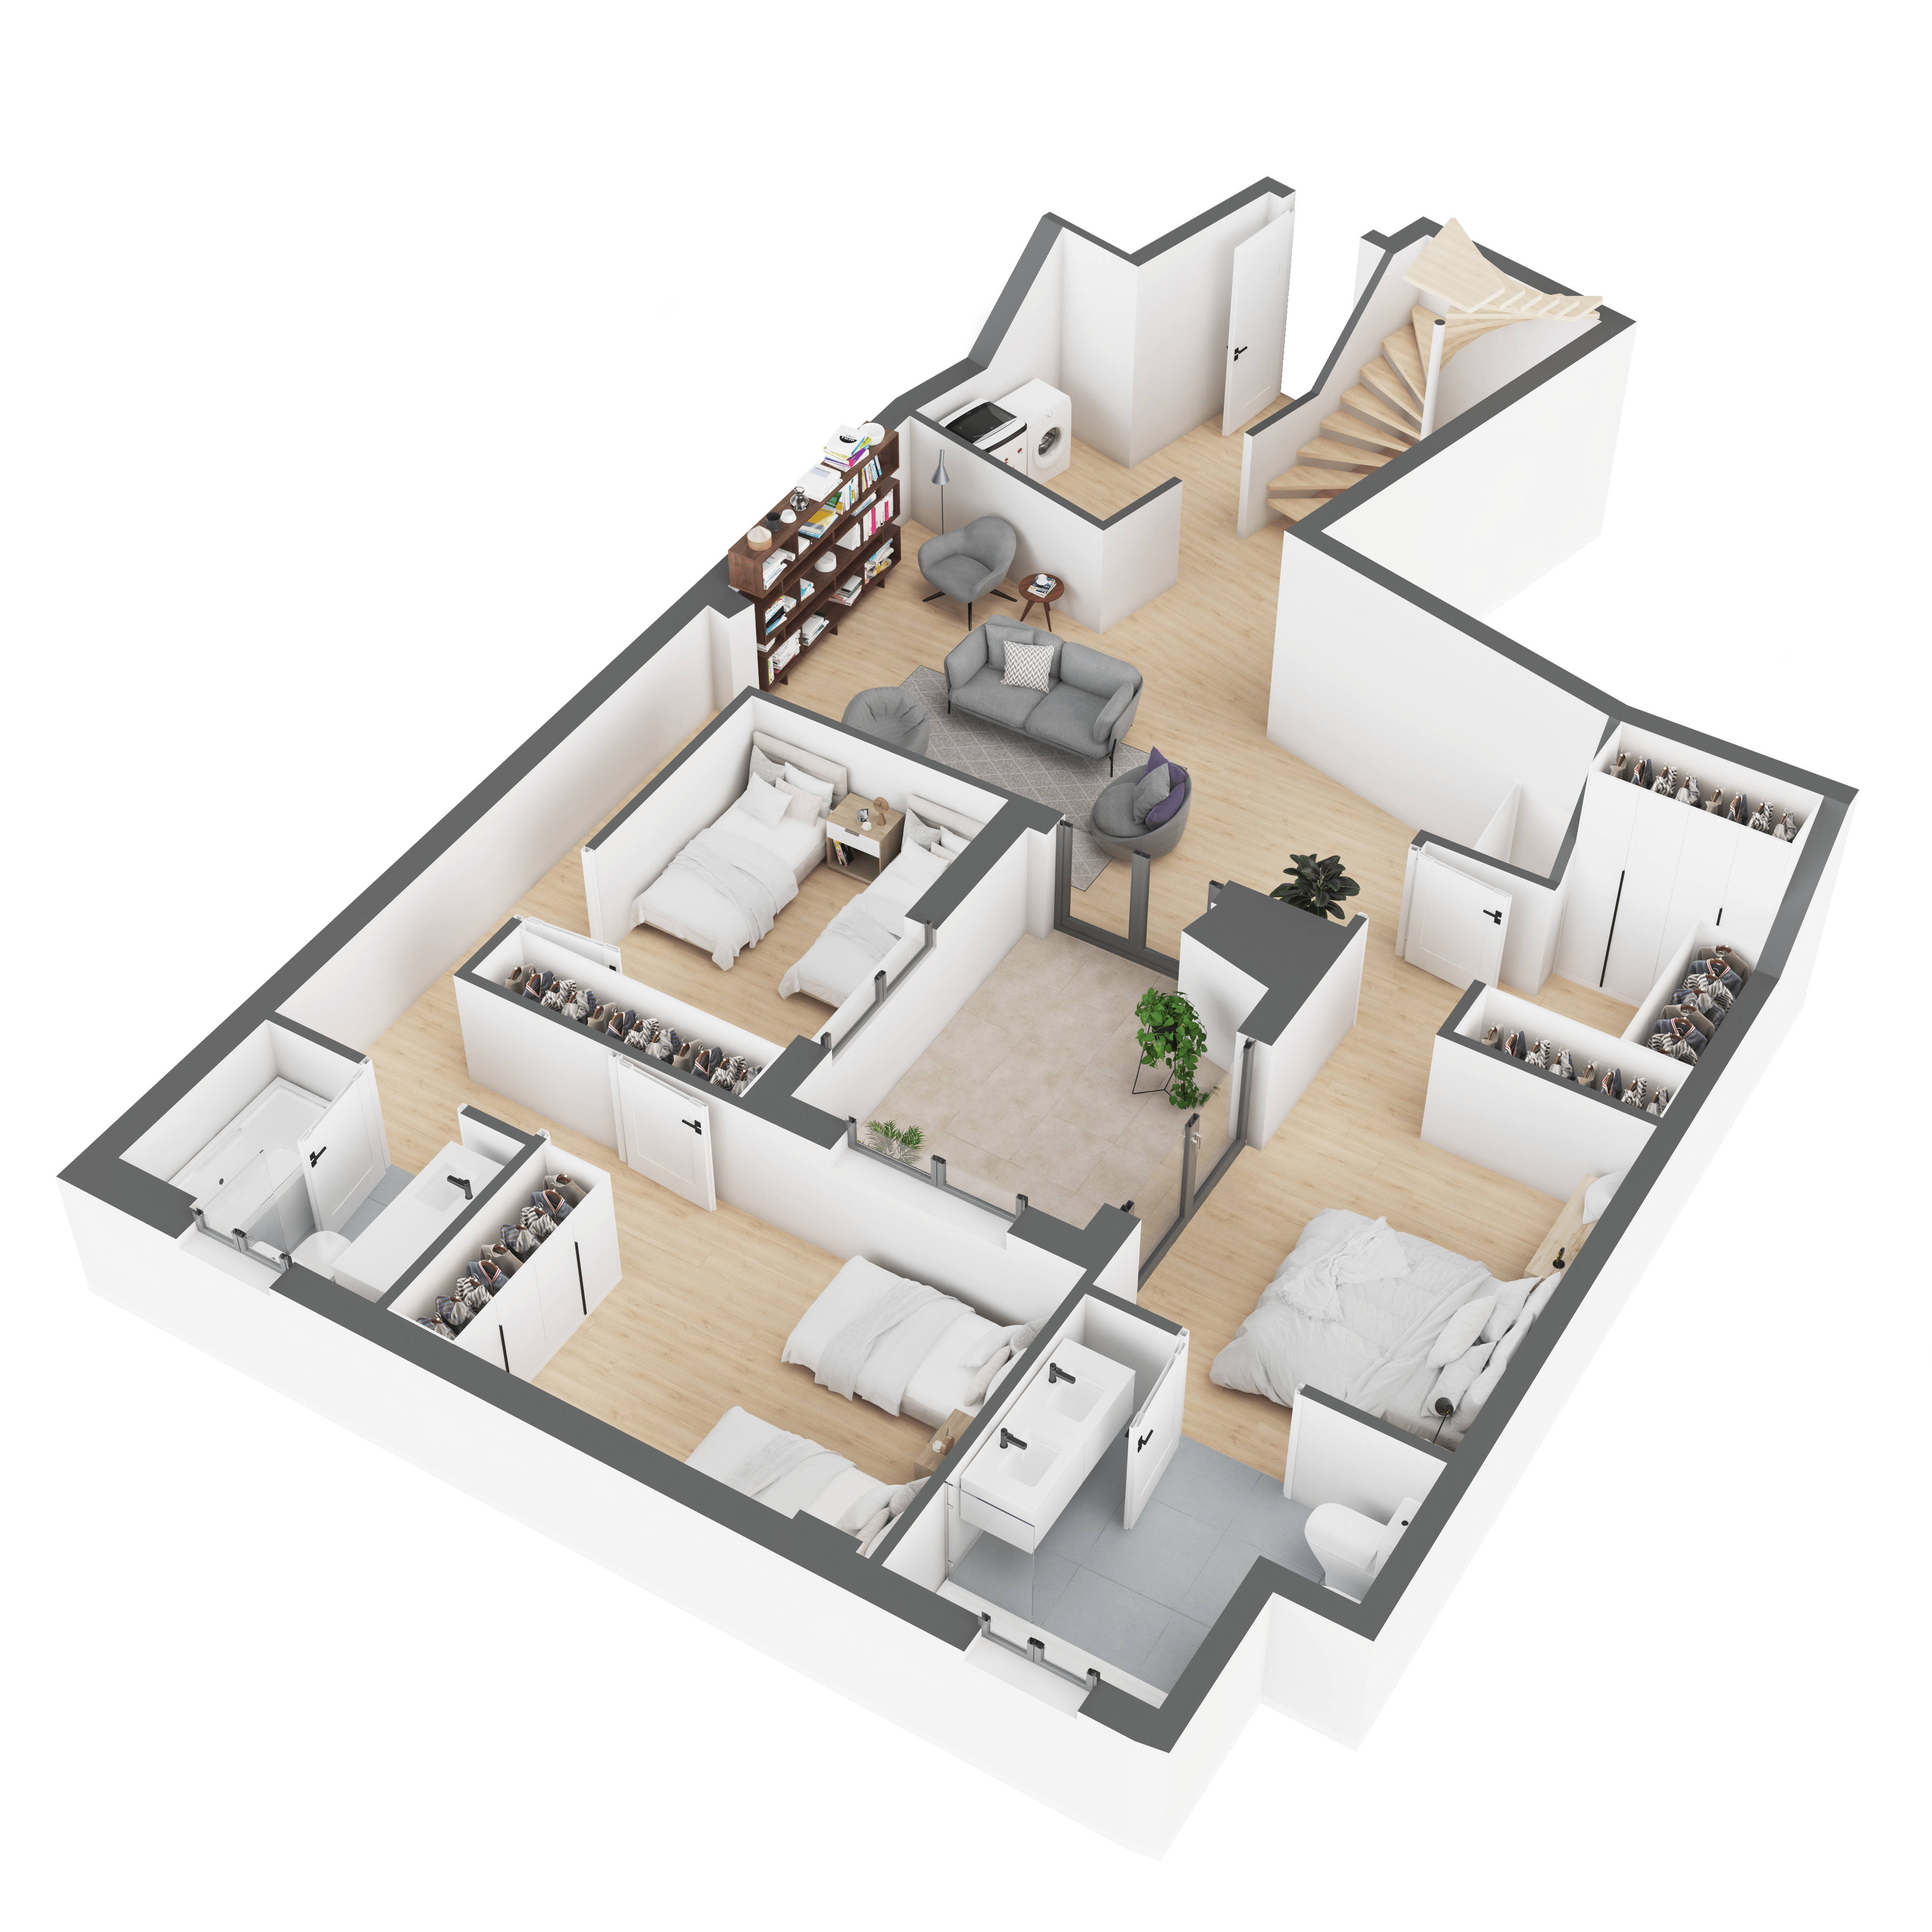 Ultra fast delivery of 3d model rendering of house ground floor in london, with 4 rooms, interior skylight and incredibly realistic 3d objects using online rendering tool